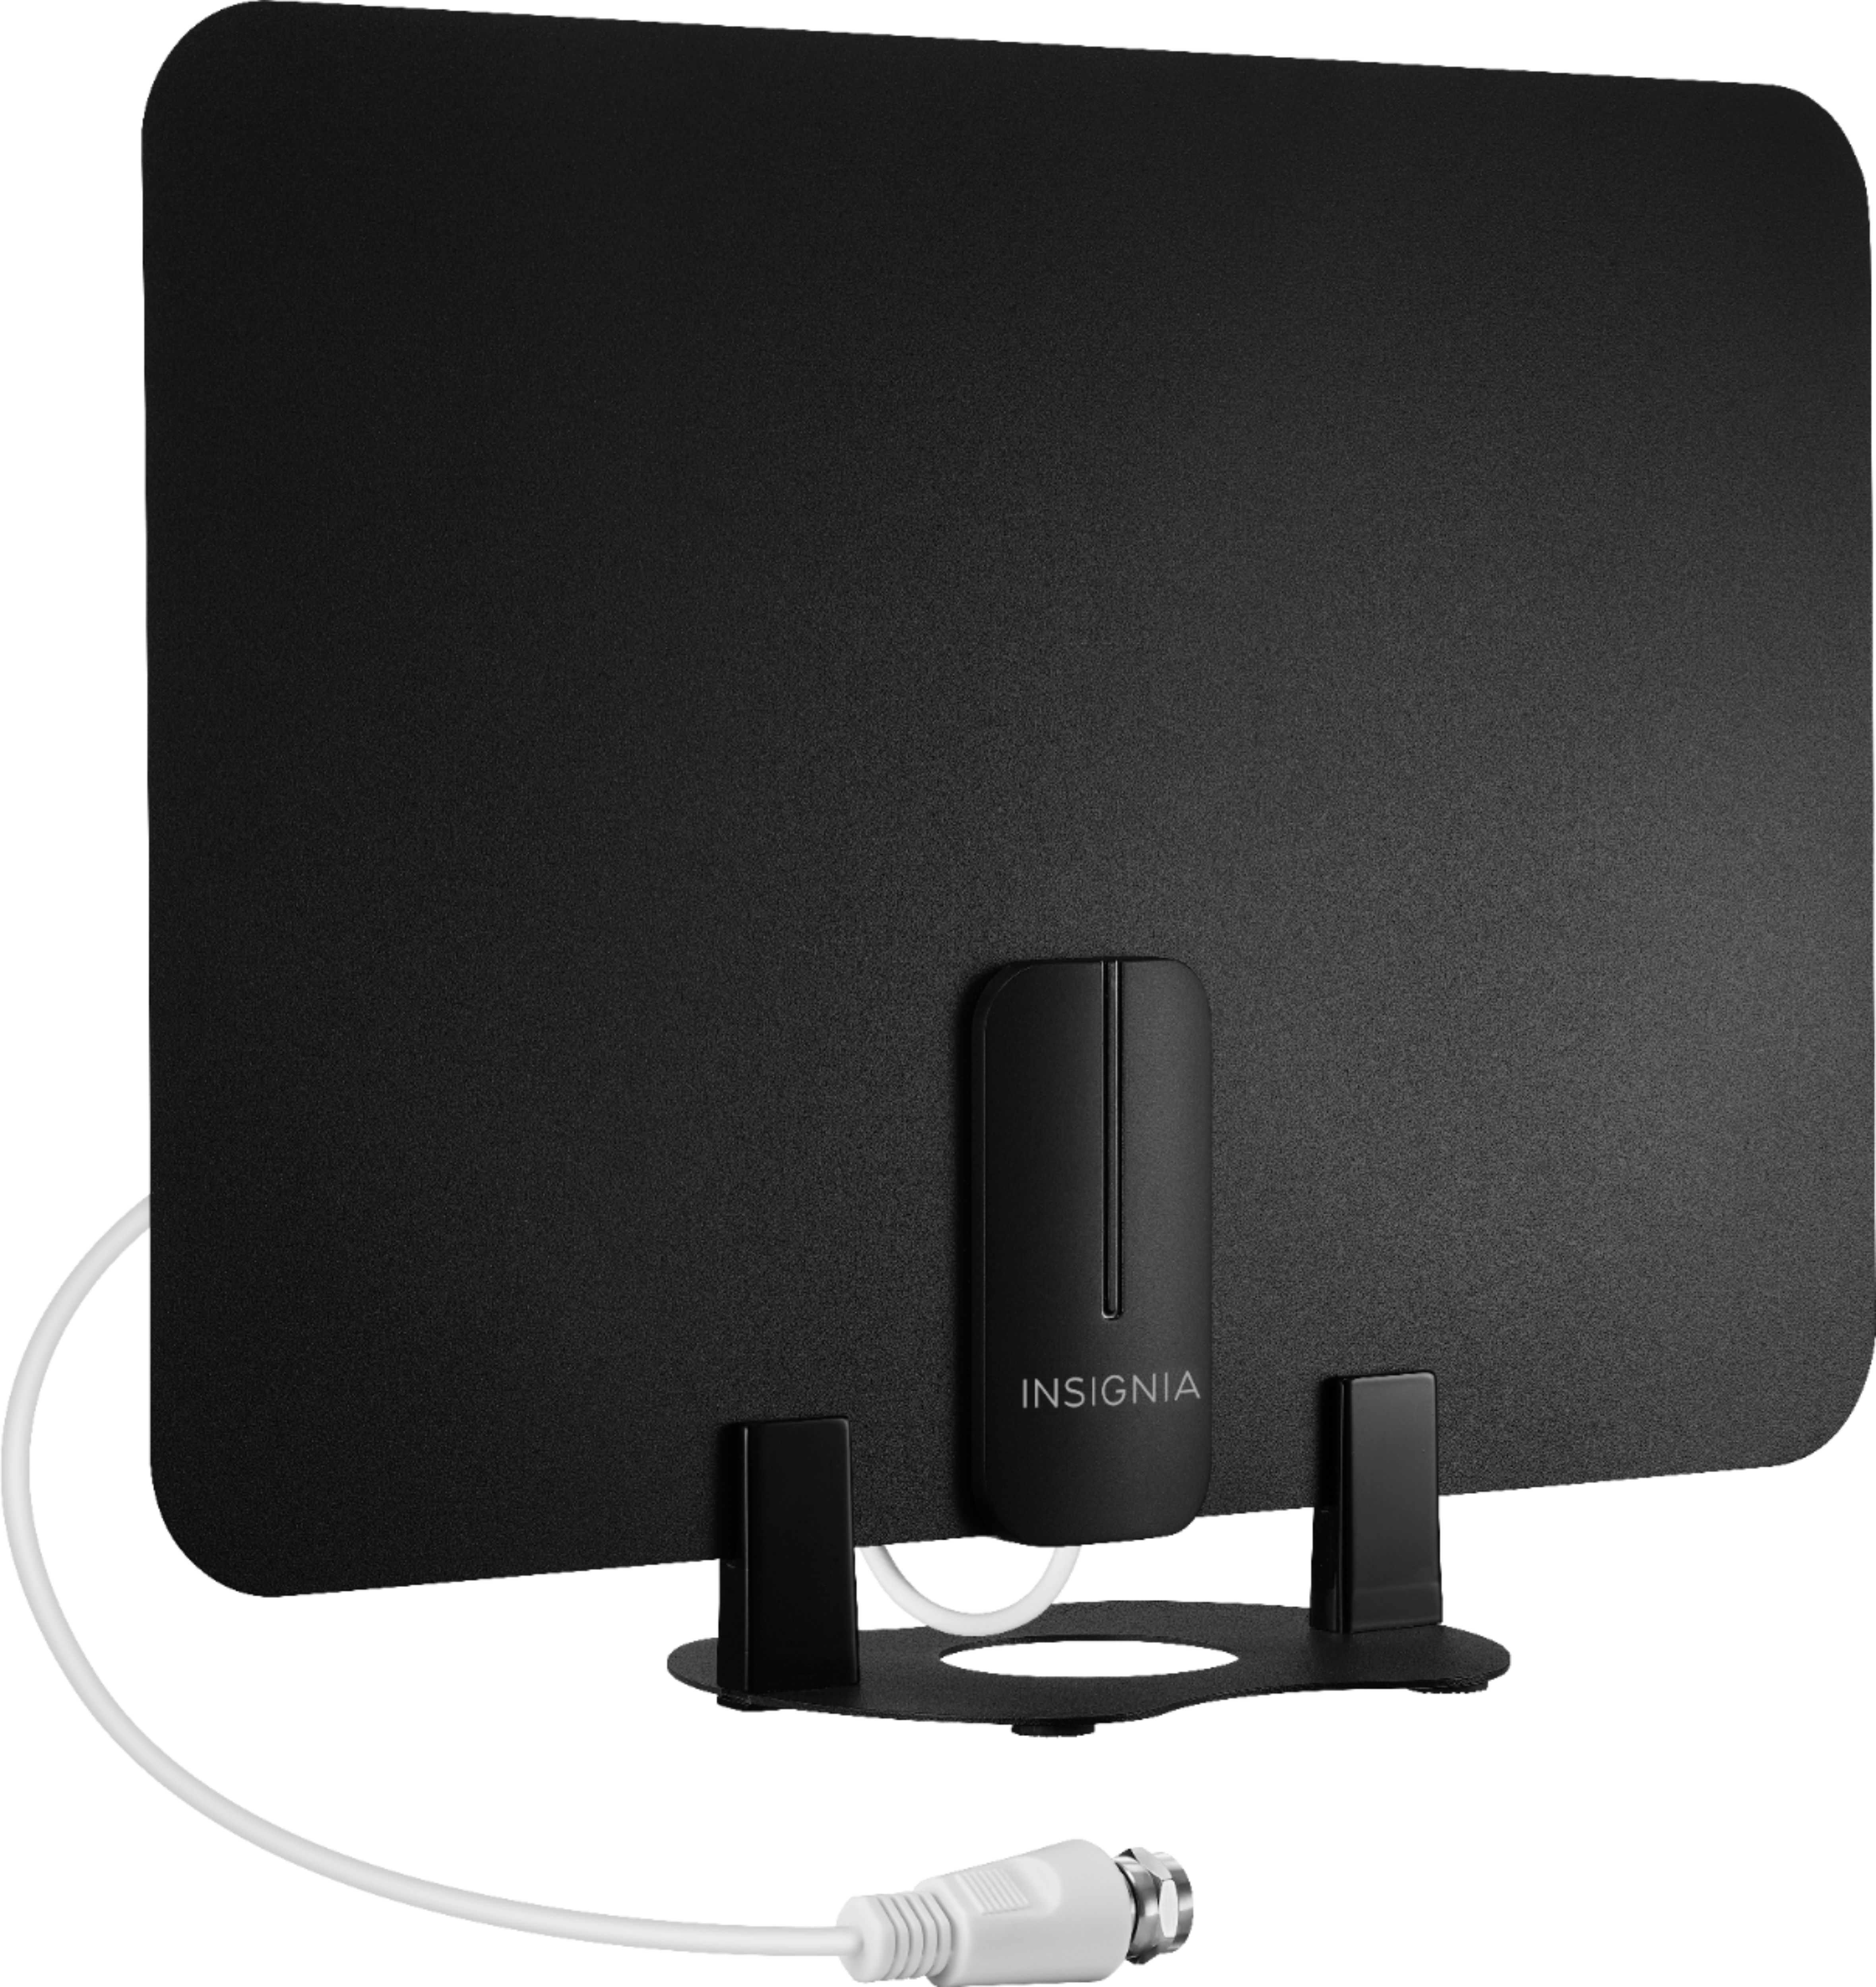 Angle View: Insignia™ - Amplified Thin Film Indoor HDTV Antenna - Black/White